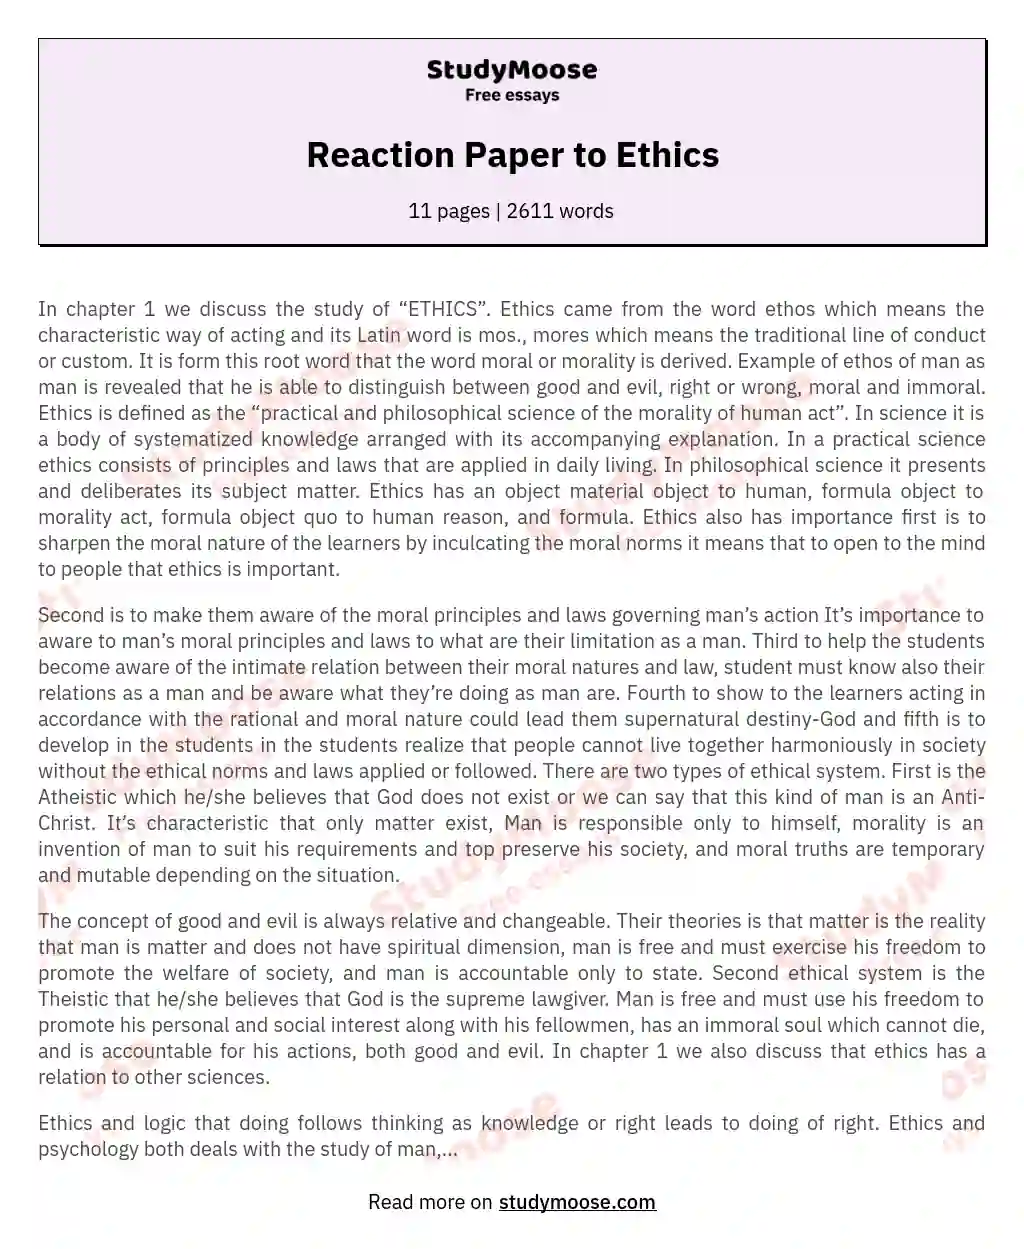 Reaction Paper to Ethics essay